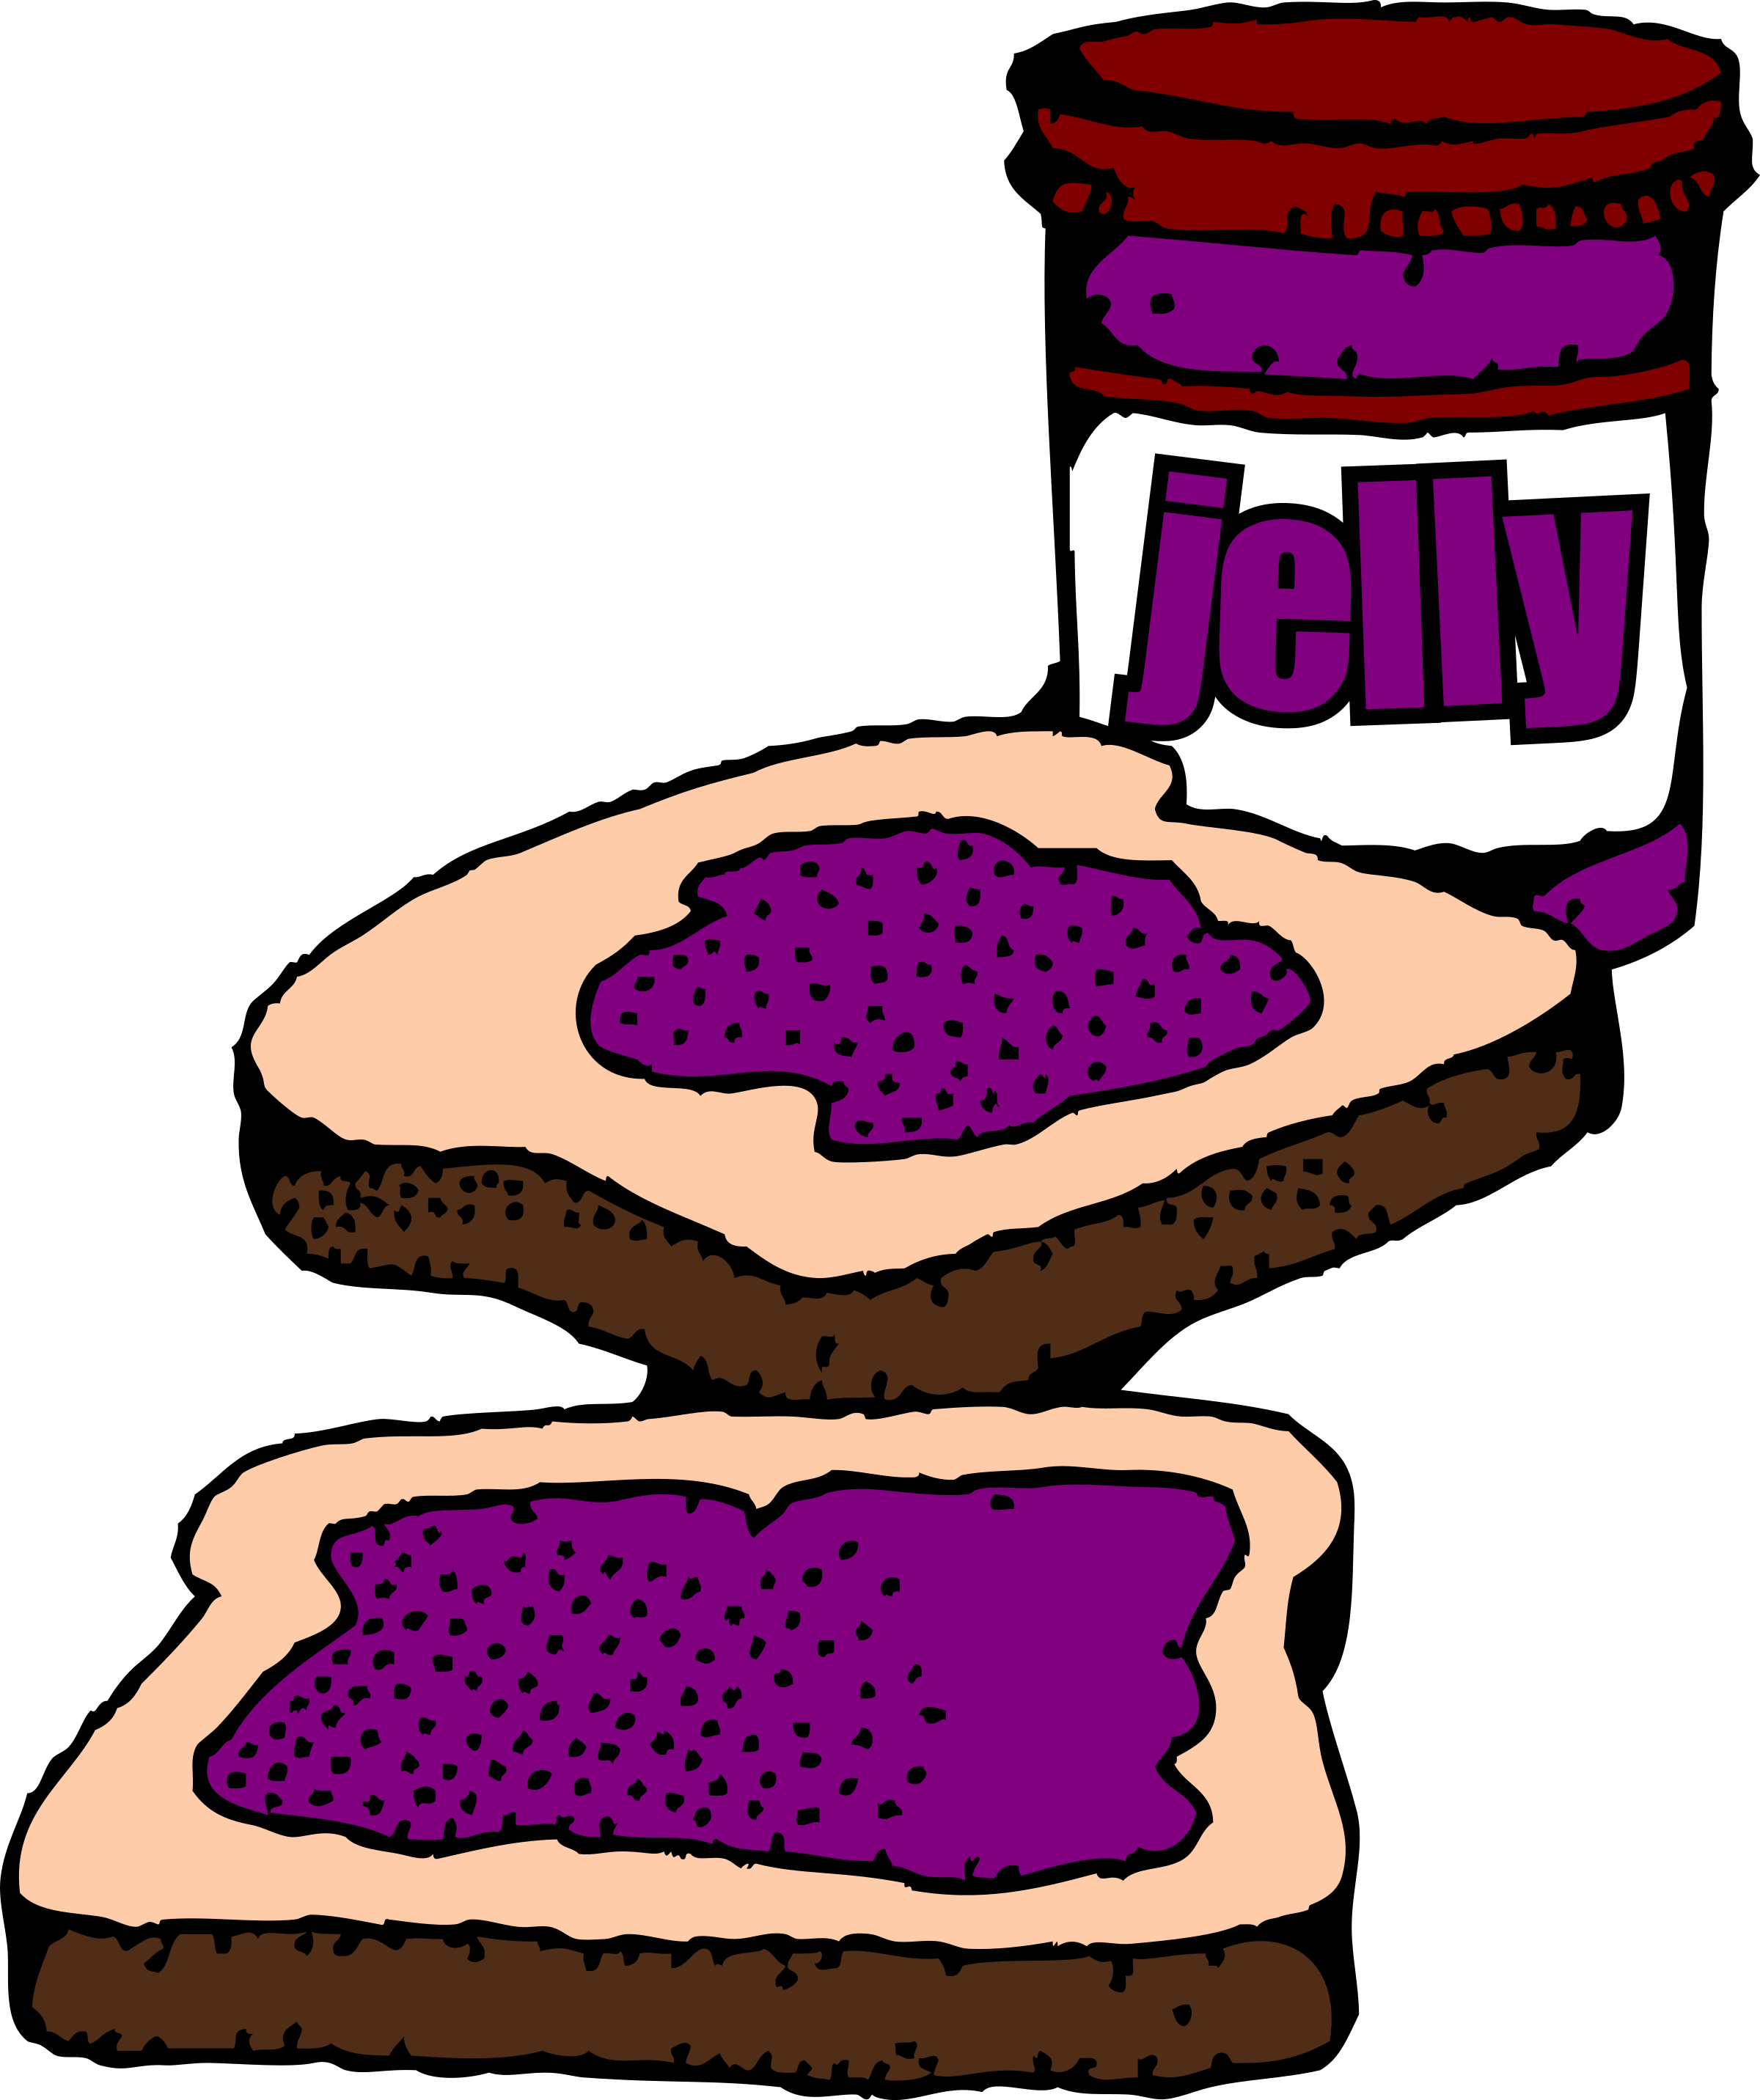 Peanut Butter and Jelly Jars. - Peanut Butter And Jelly Clip Art